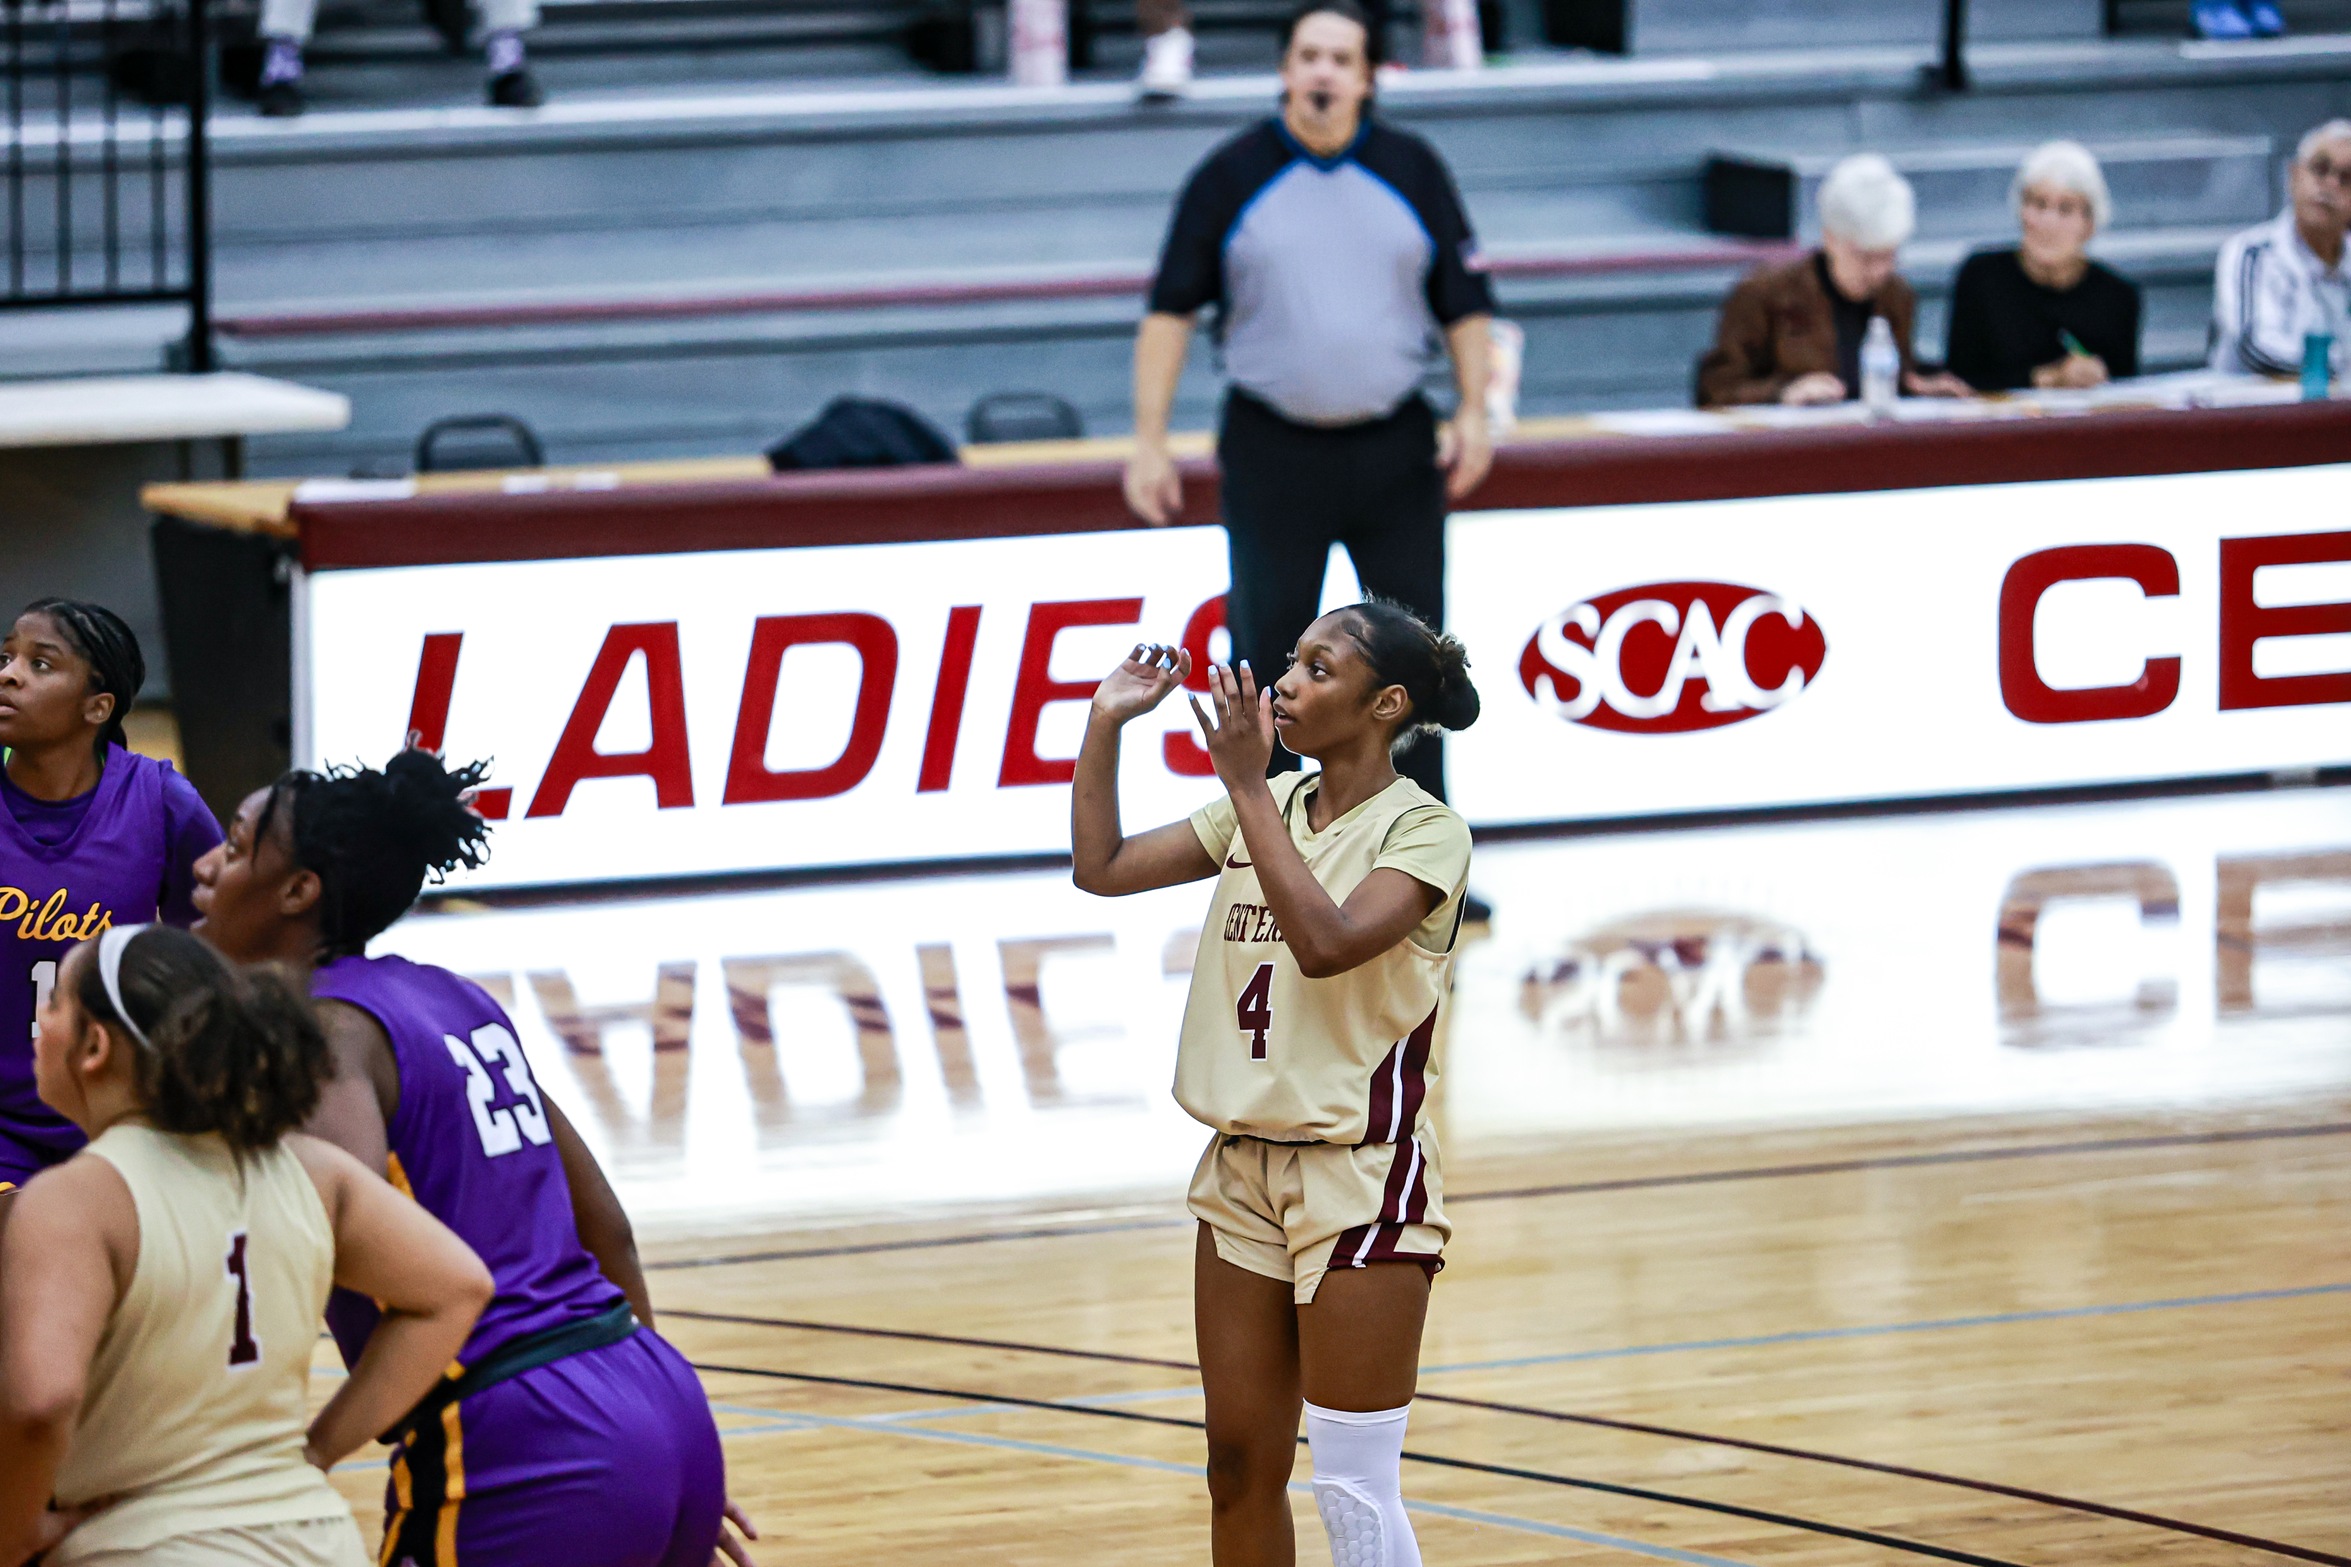 Sophomore G TaNyjah Plumber led the Ladies with 19 points on Saturday.

PHOTO:Isabell Gonzales